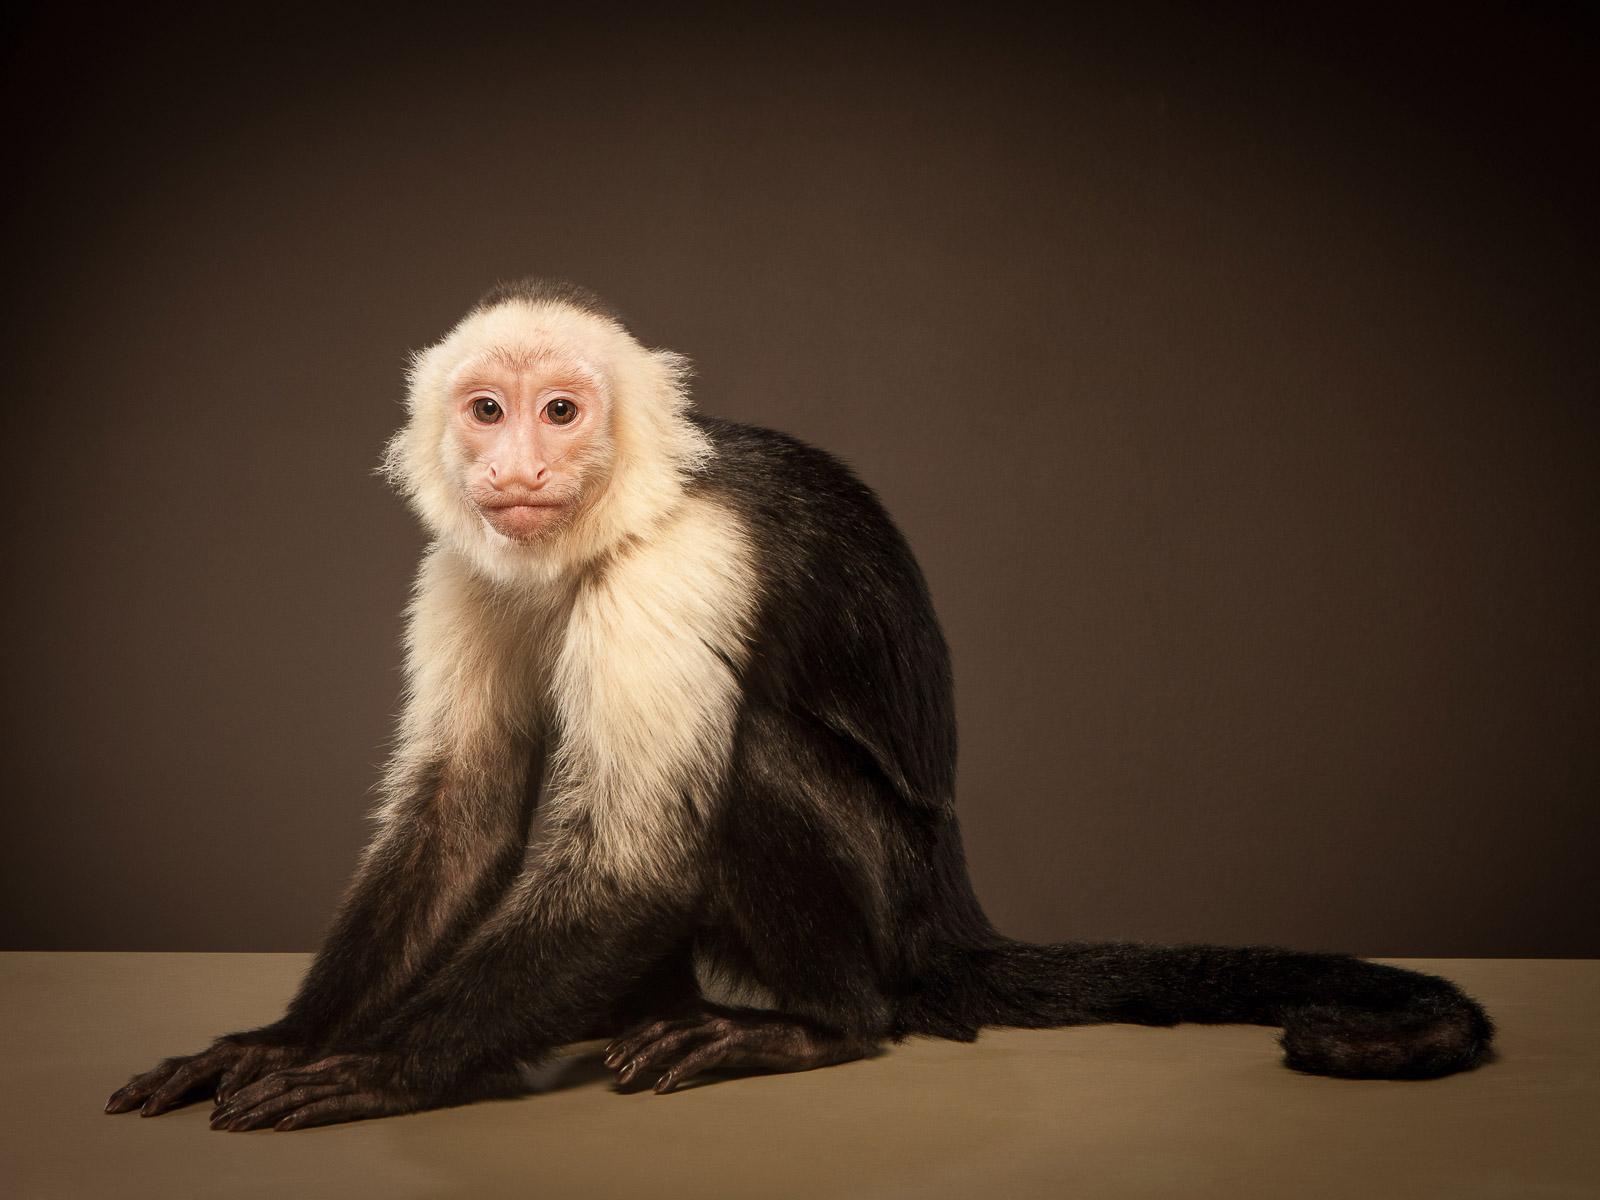 Capuchin 1 , Signed limited edition animal fine art print, brown and white monkey - Black Color Photograph by Tim Platt